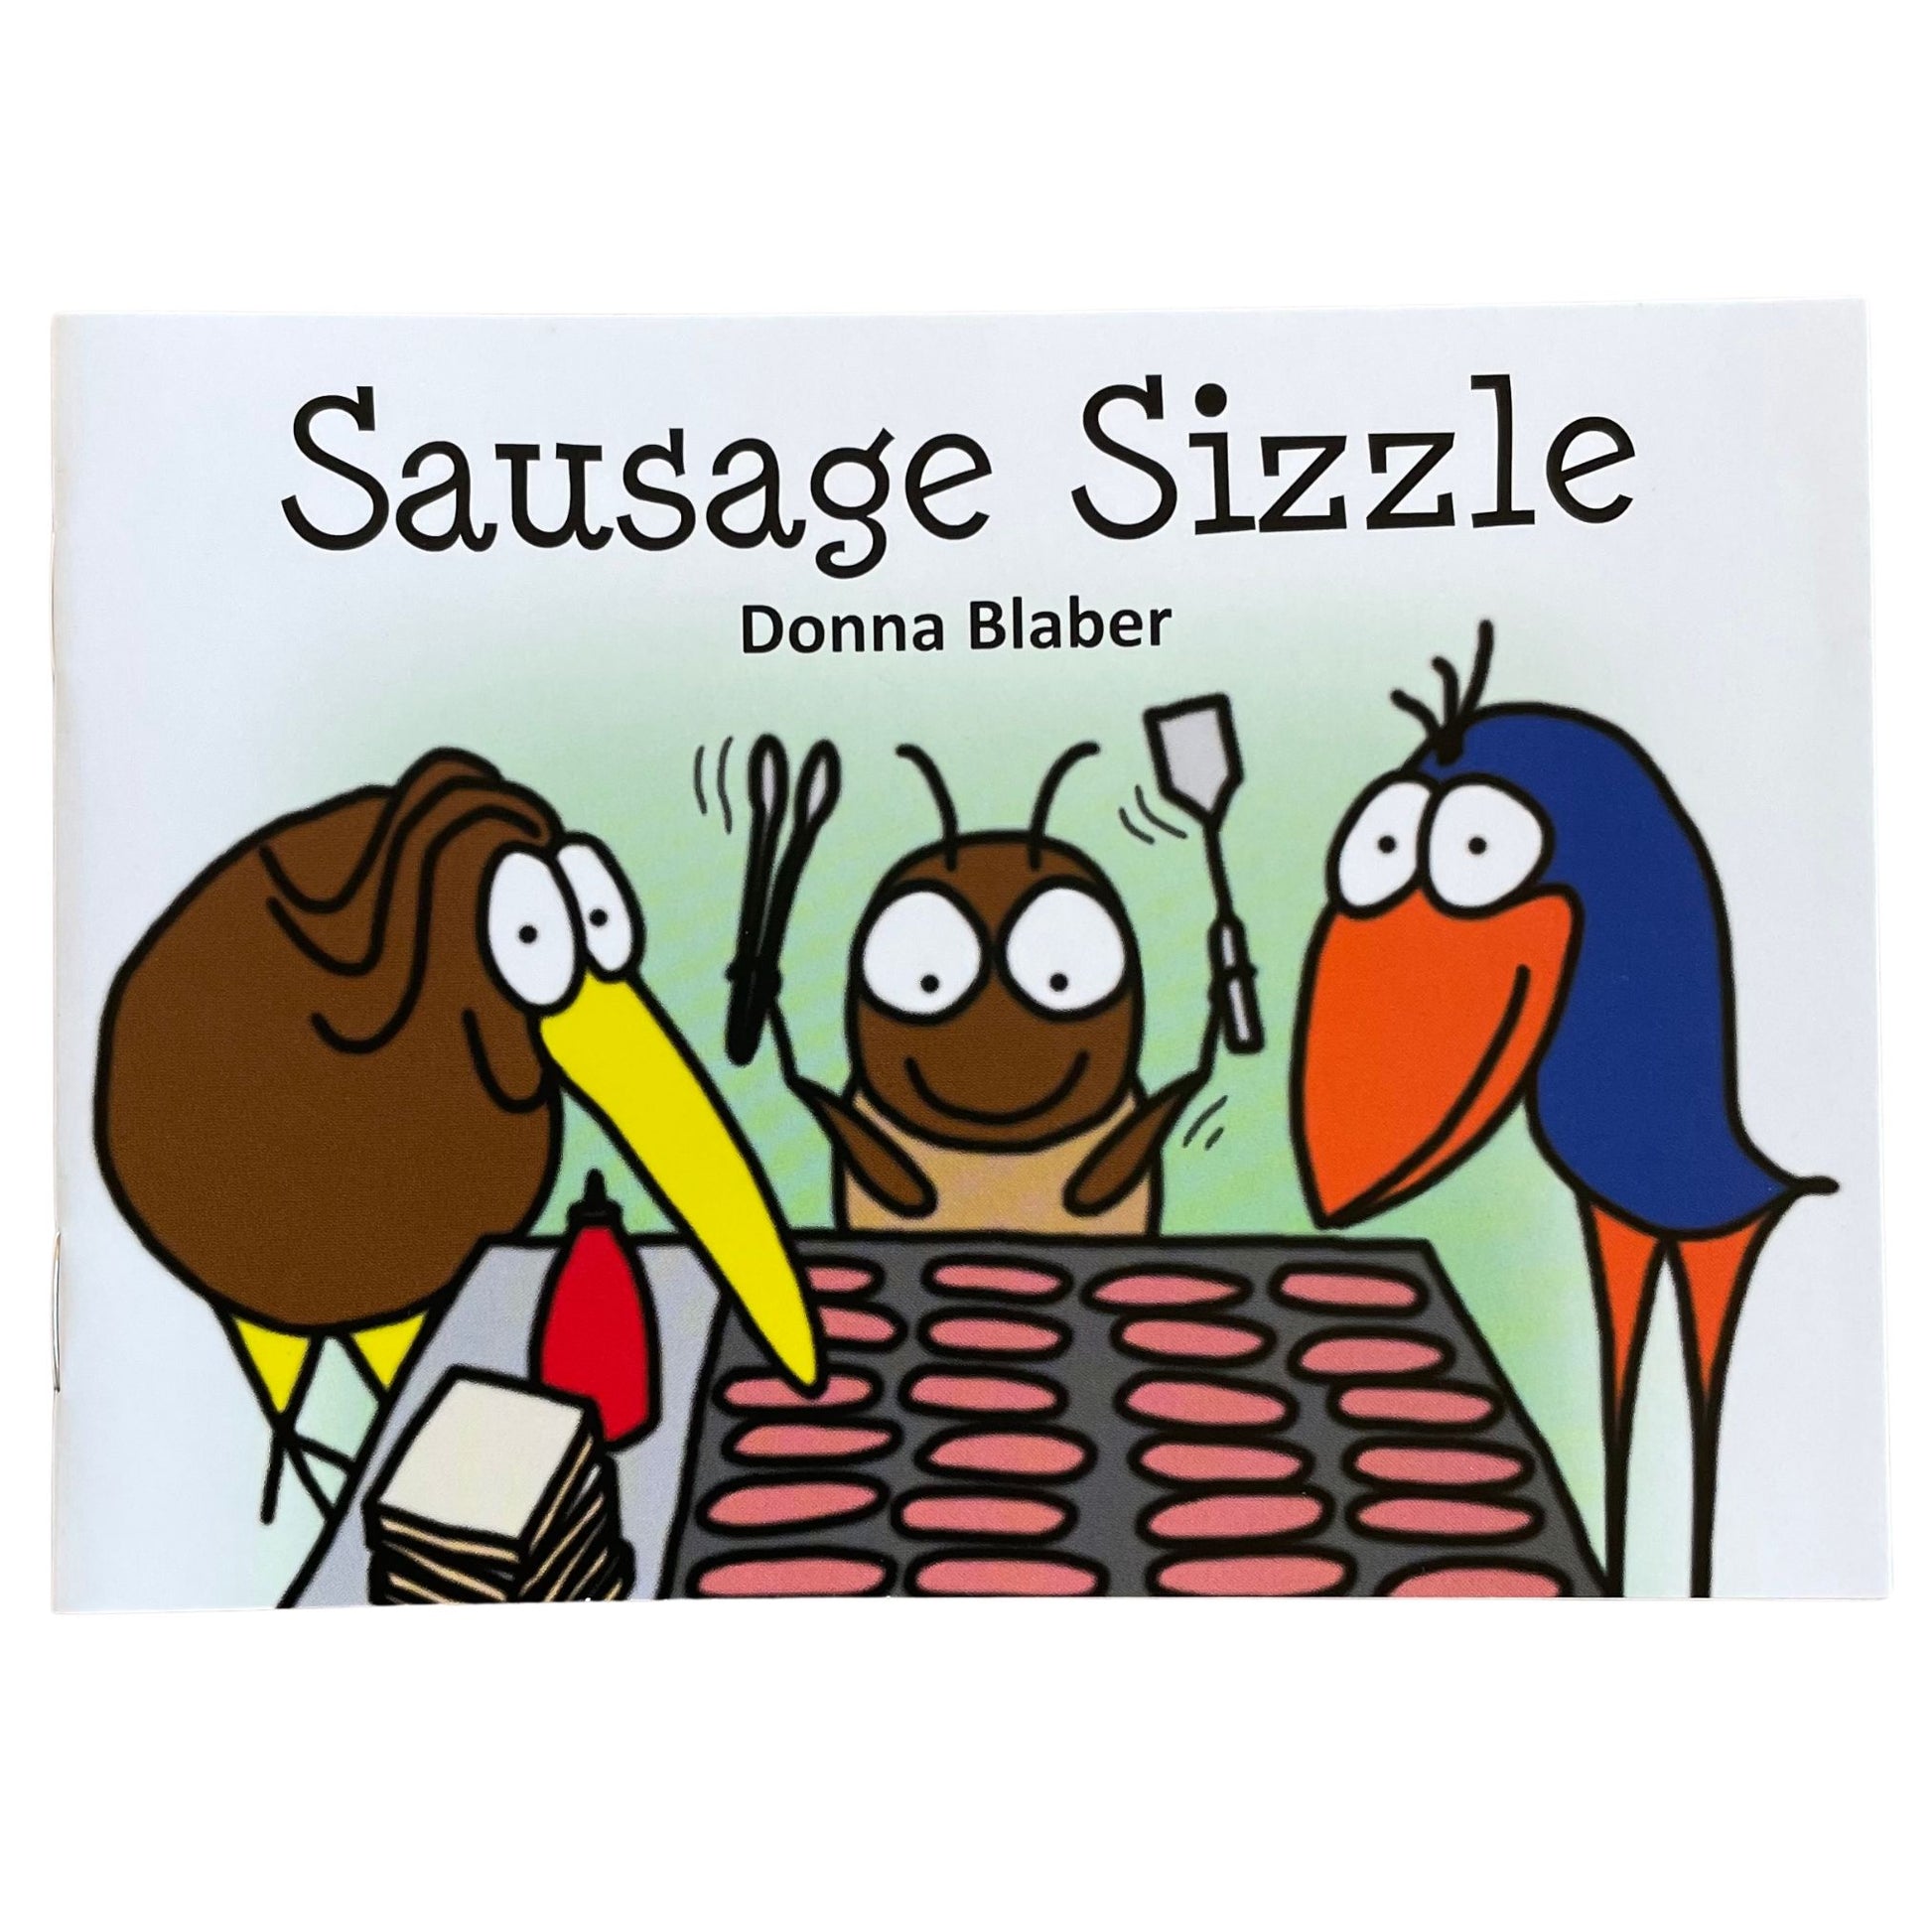 Sausage Sizzle - soft cover children's story book.